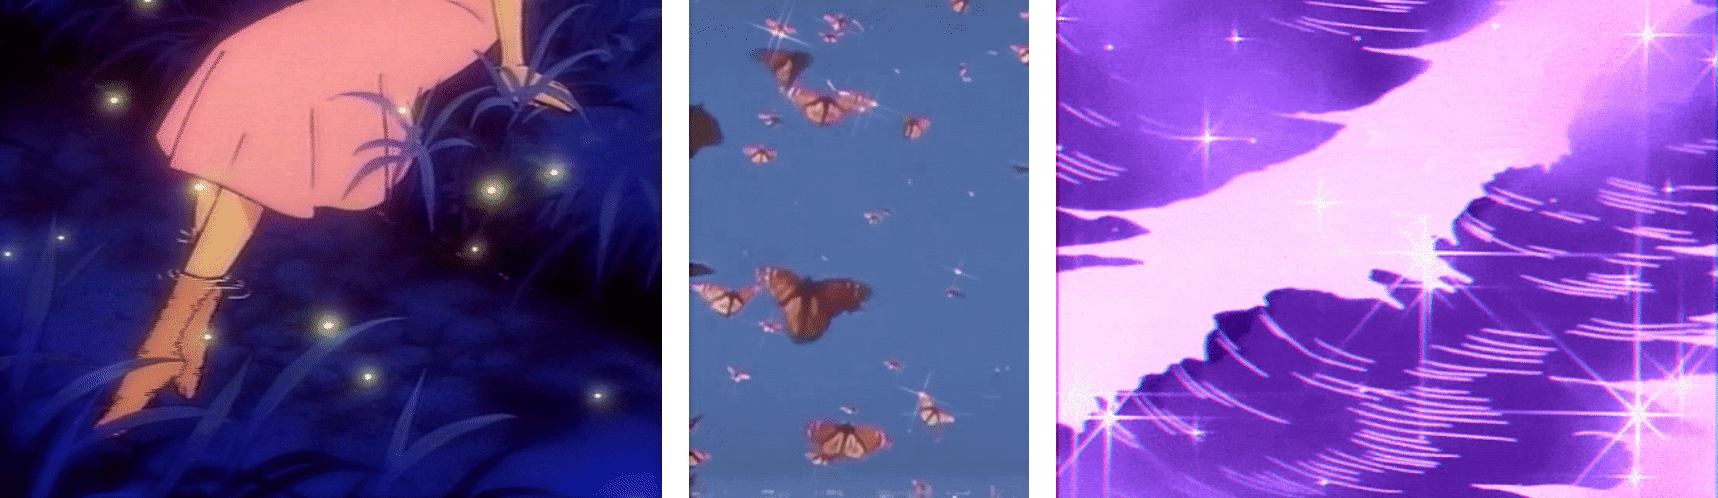 Examples of aesthetic GIFs. 